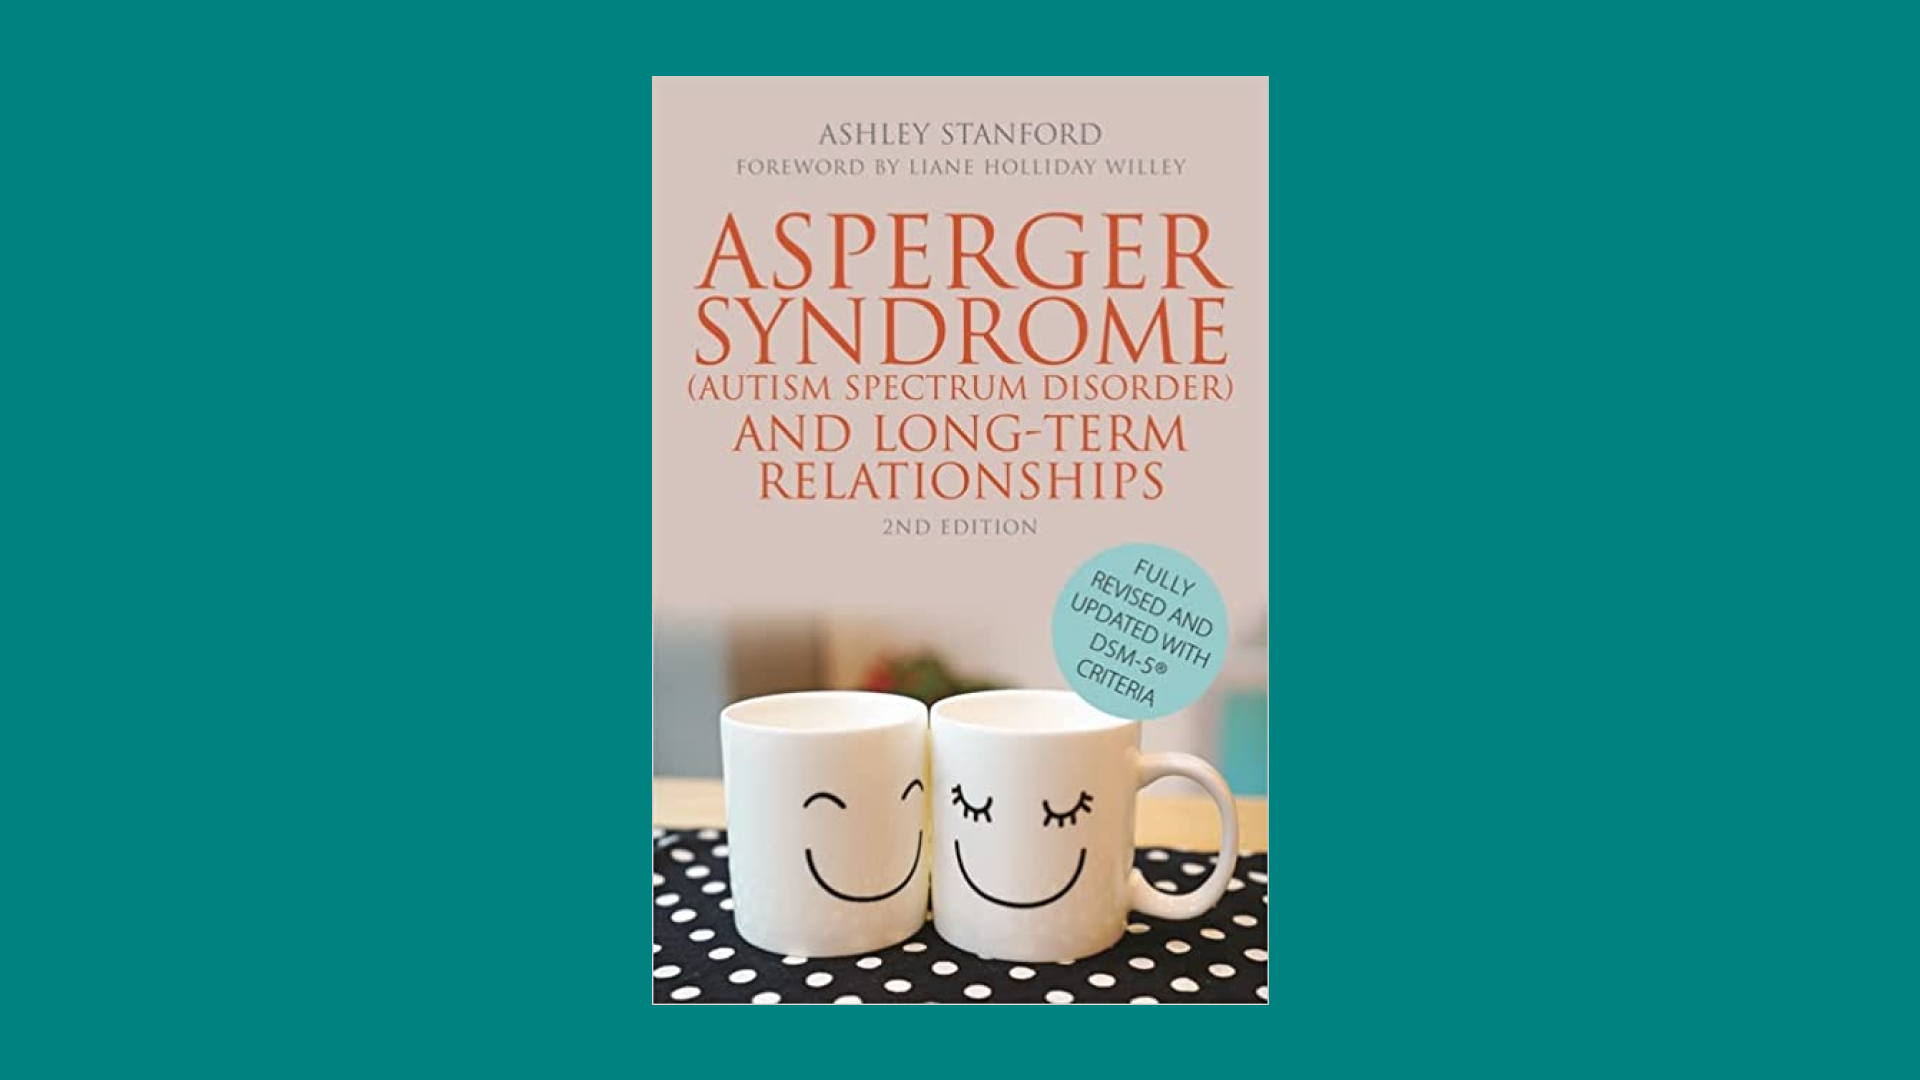 Cover of book "Asperger Syndrome (Autism Spectrum Disorder) and Long-Term Relationships," which features too coffee mugs with smiley faces